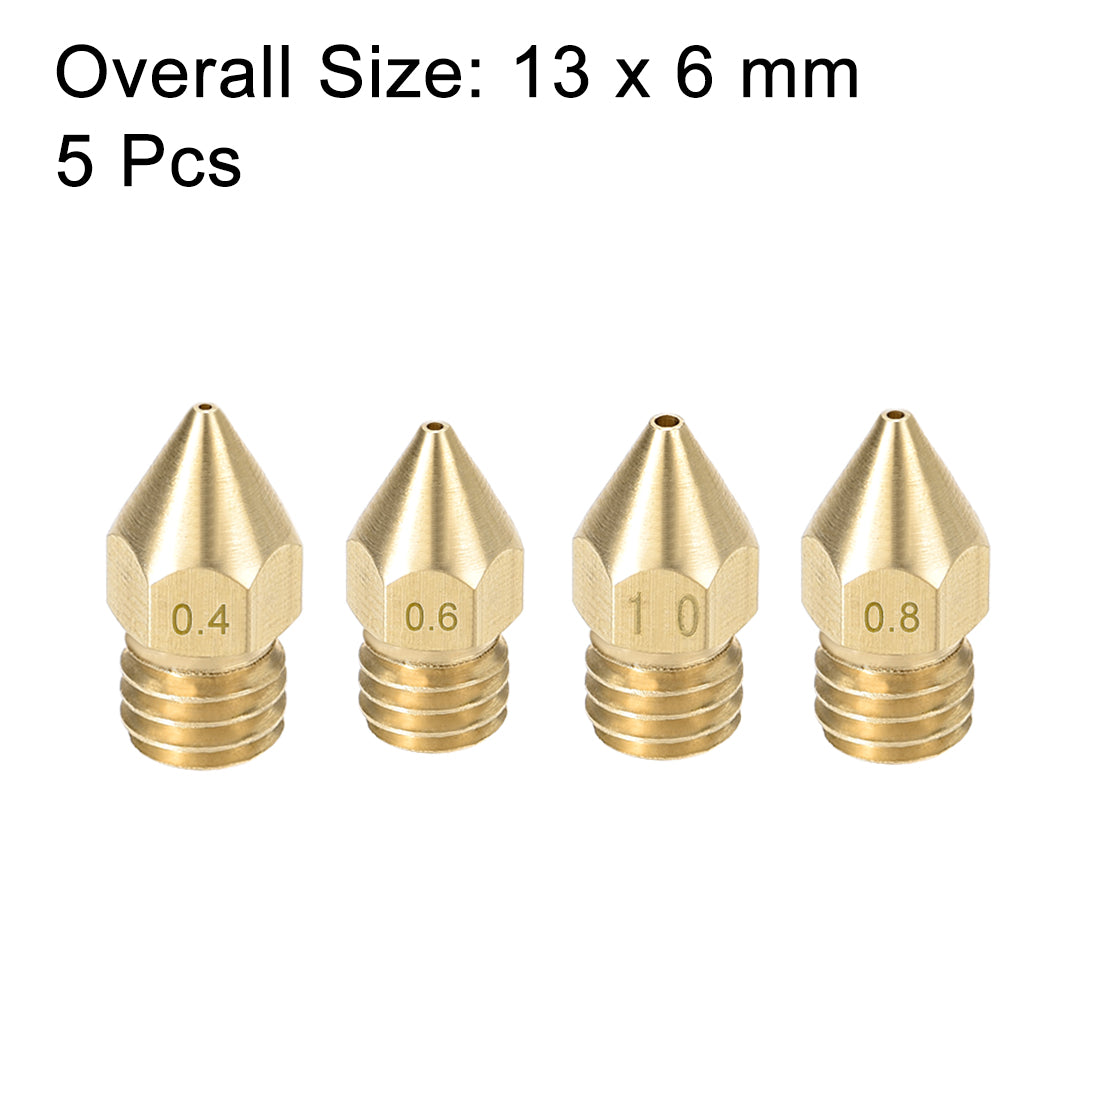 uxcell Uxcell 3D Printer Nozzle Fit for MK8,for 1.75mm Filament Brass,0.4mm - 1mm Total 5pcs